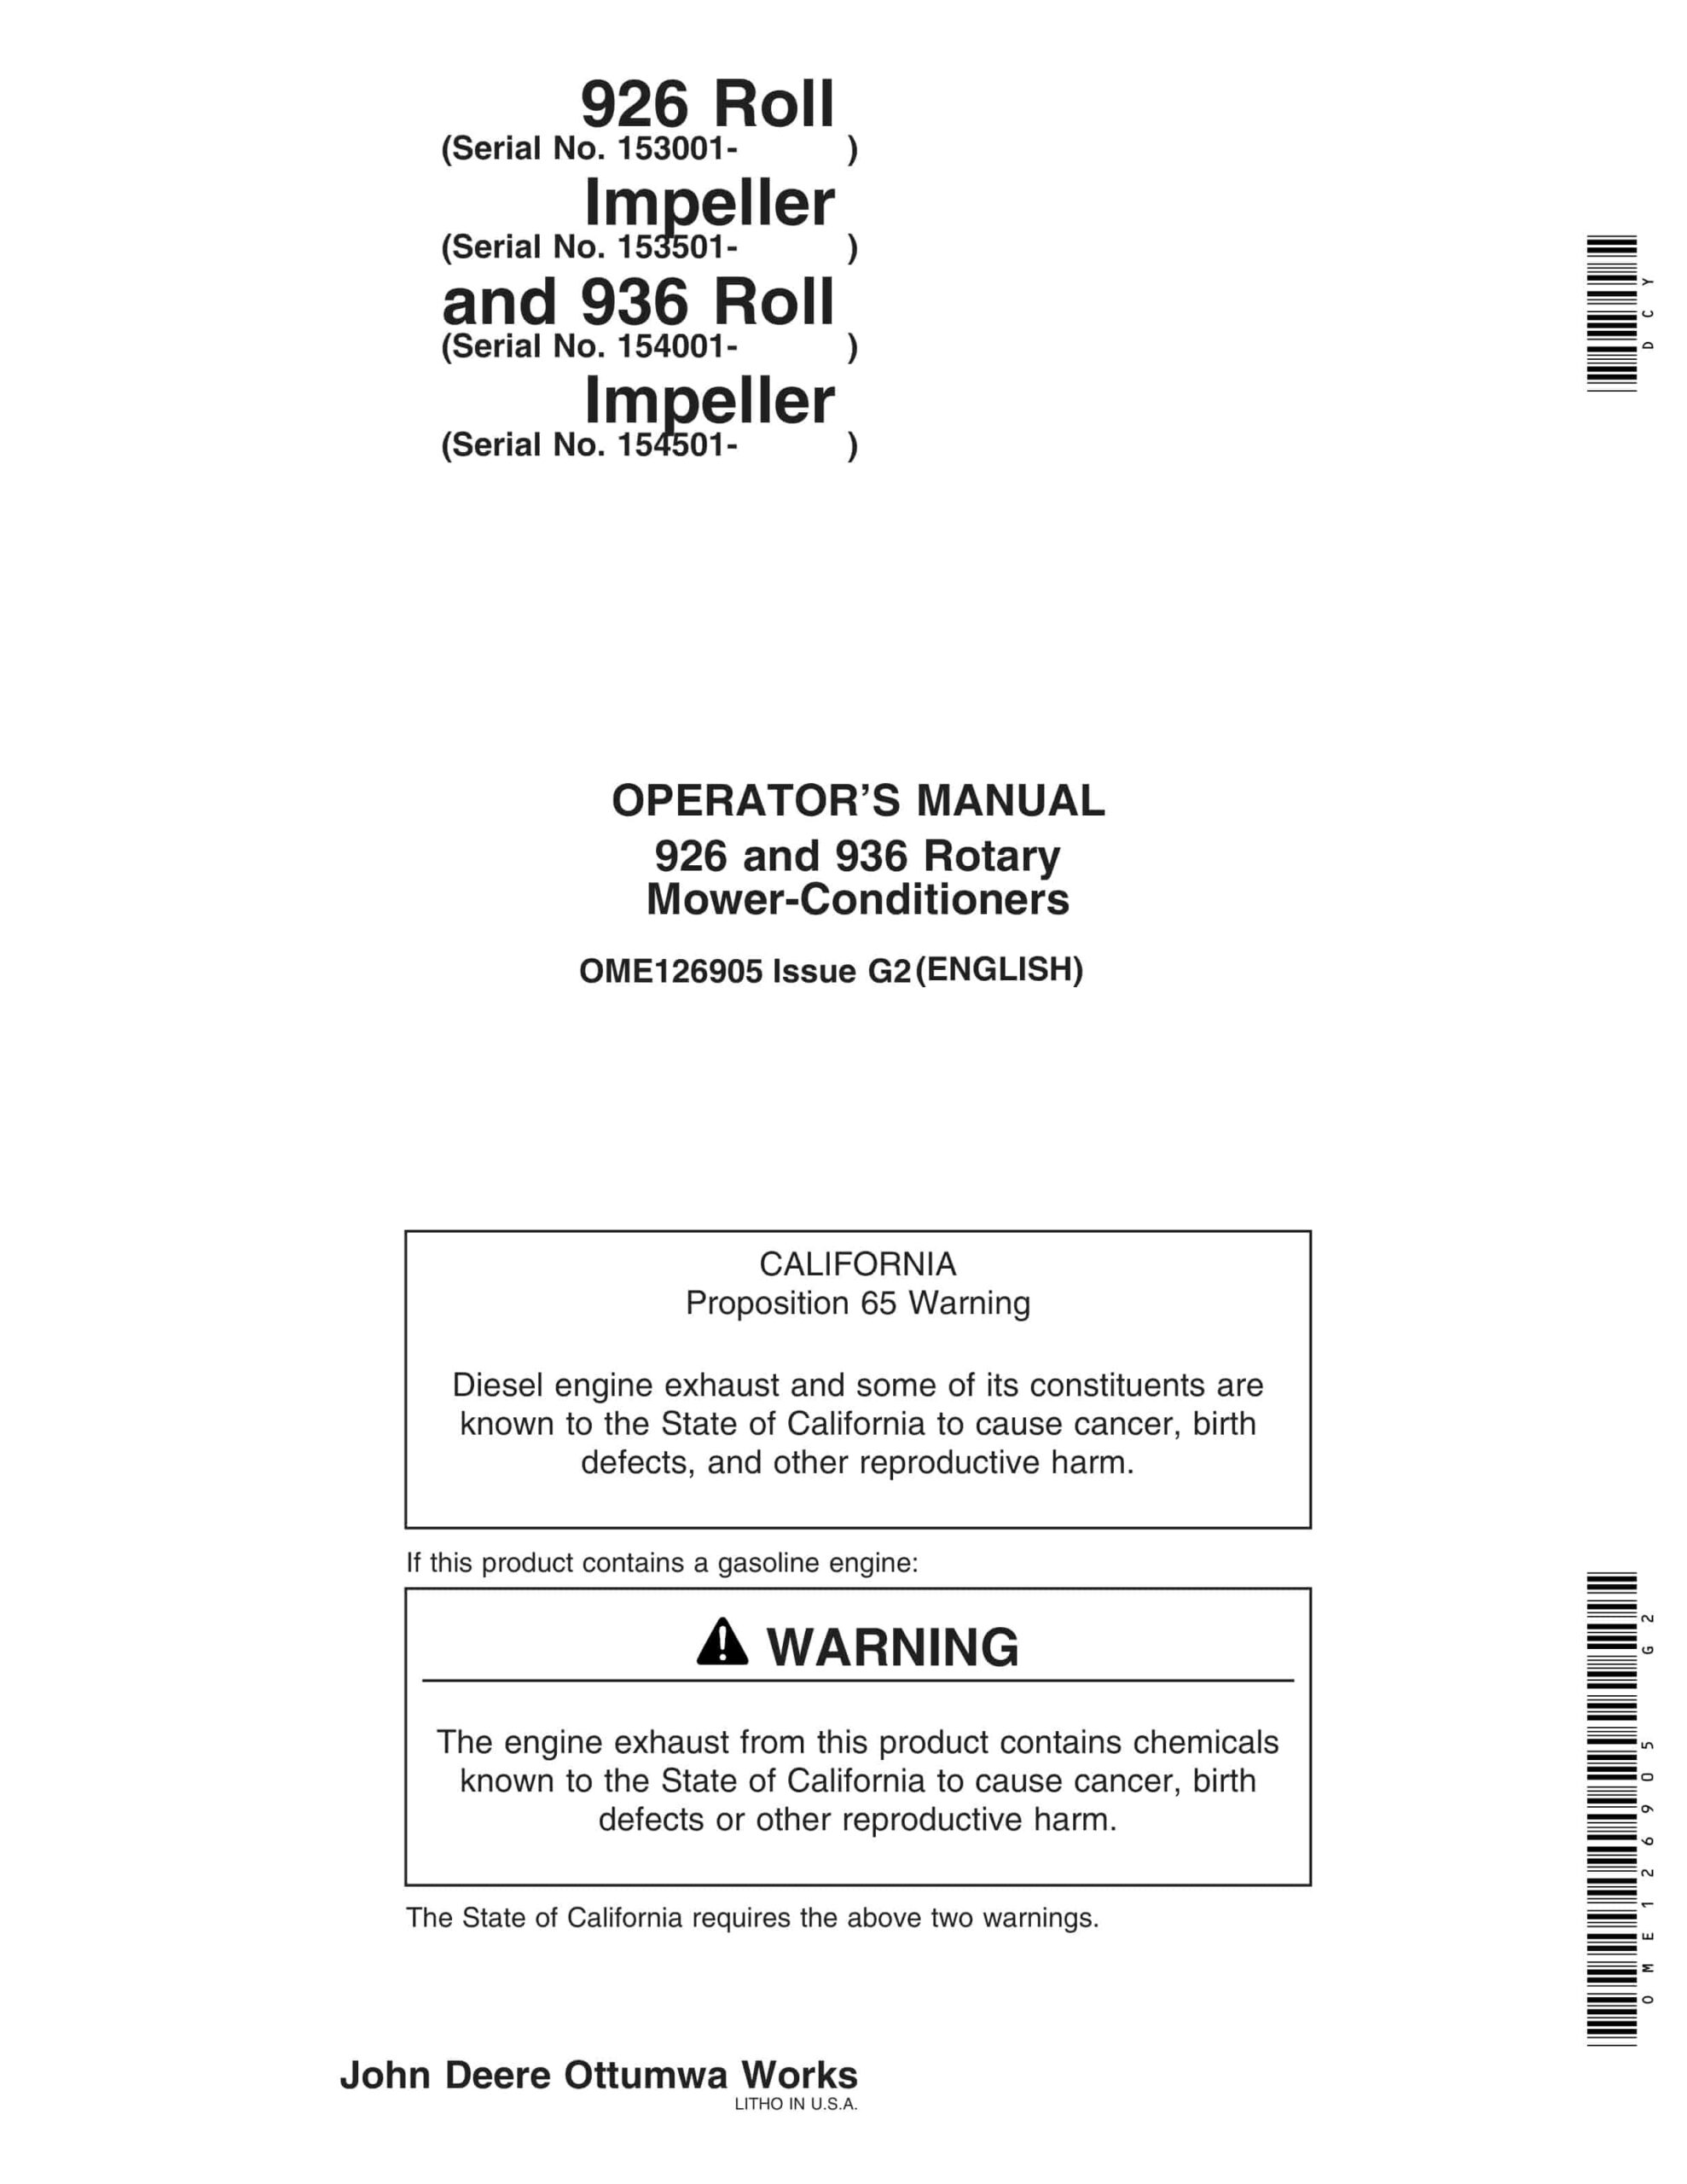 John Deere 926 and 936 Rotary Mower-Conditioner Operator Manual OME126905-1